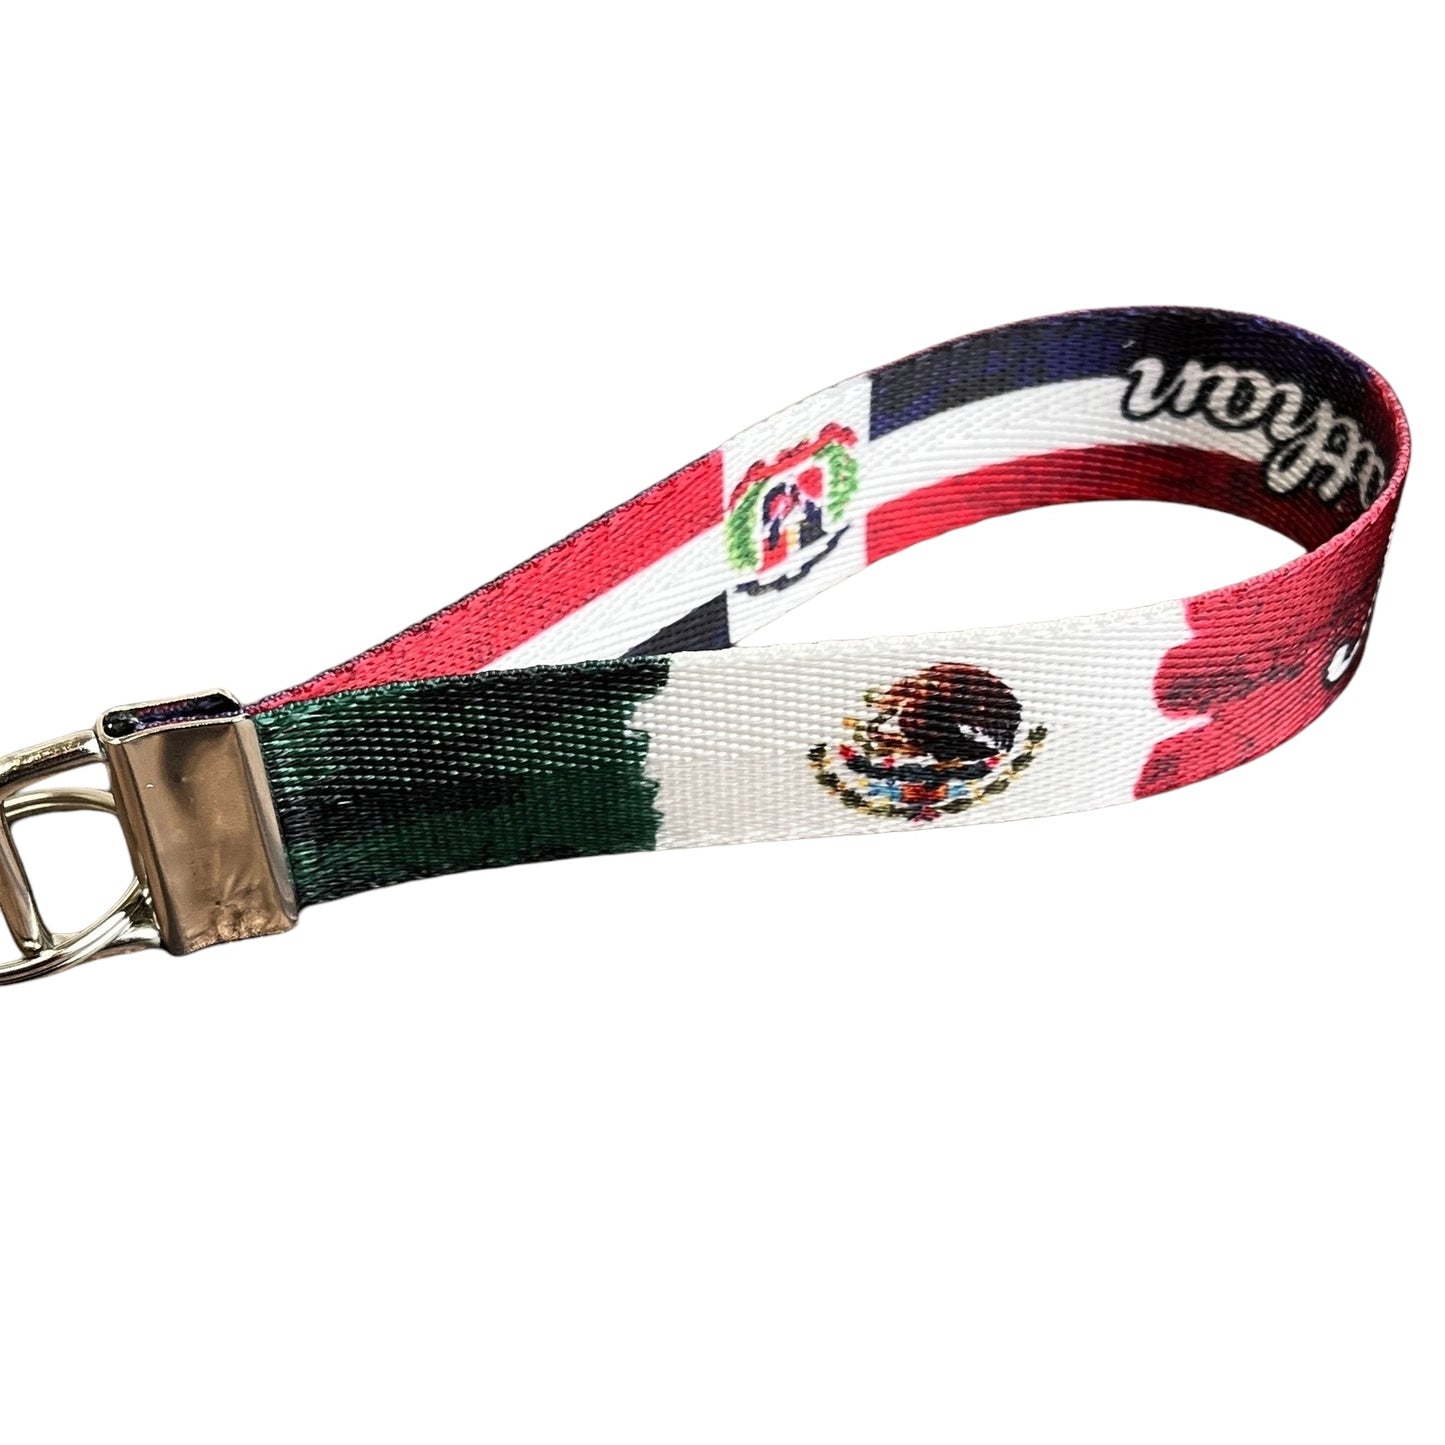 Personalized Mexican Dominican Artistic Ryan's Version Nylon Key Fob - Custom Mexico and Dominican Republic Flags Combined Design Wristlet Keychain